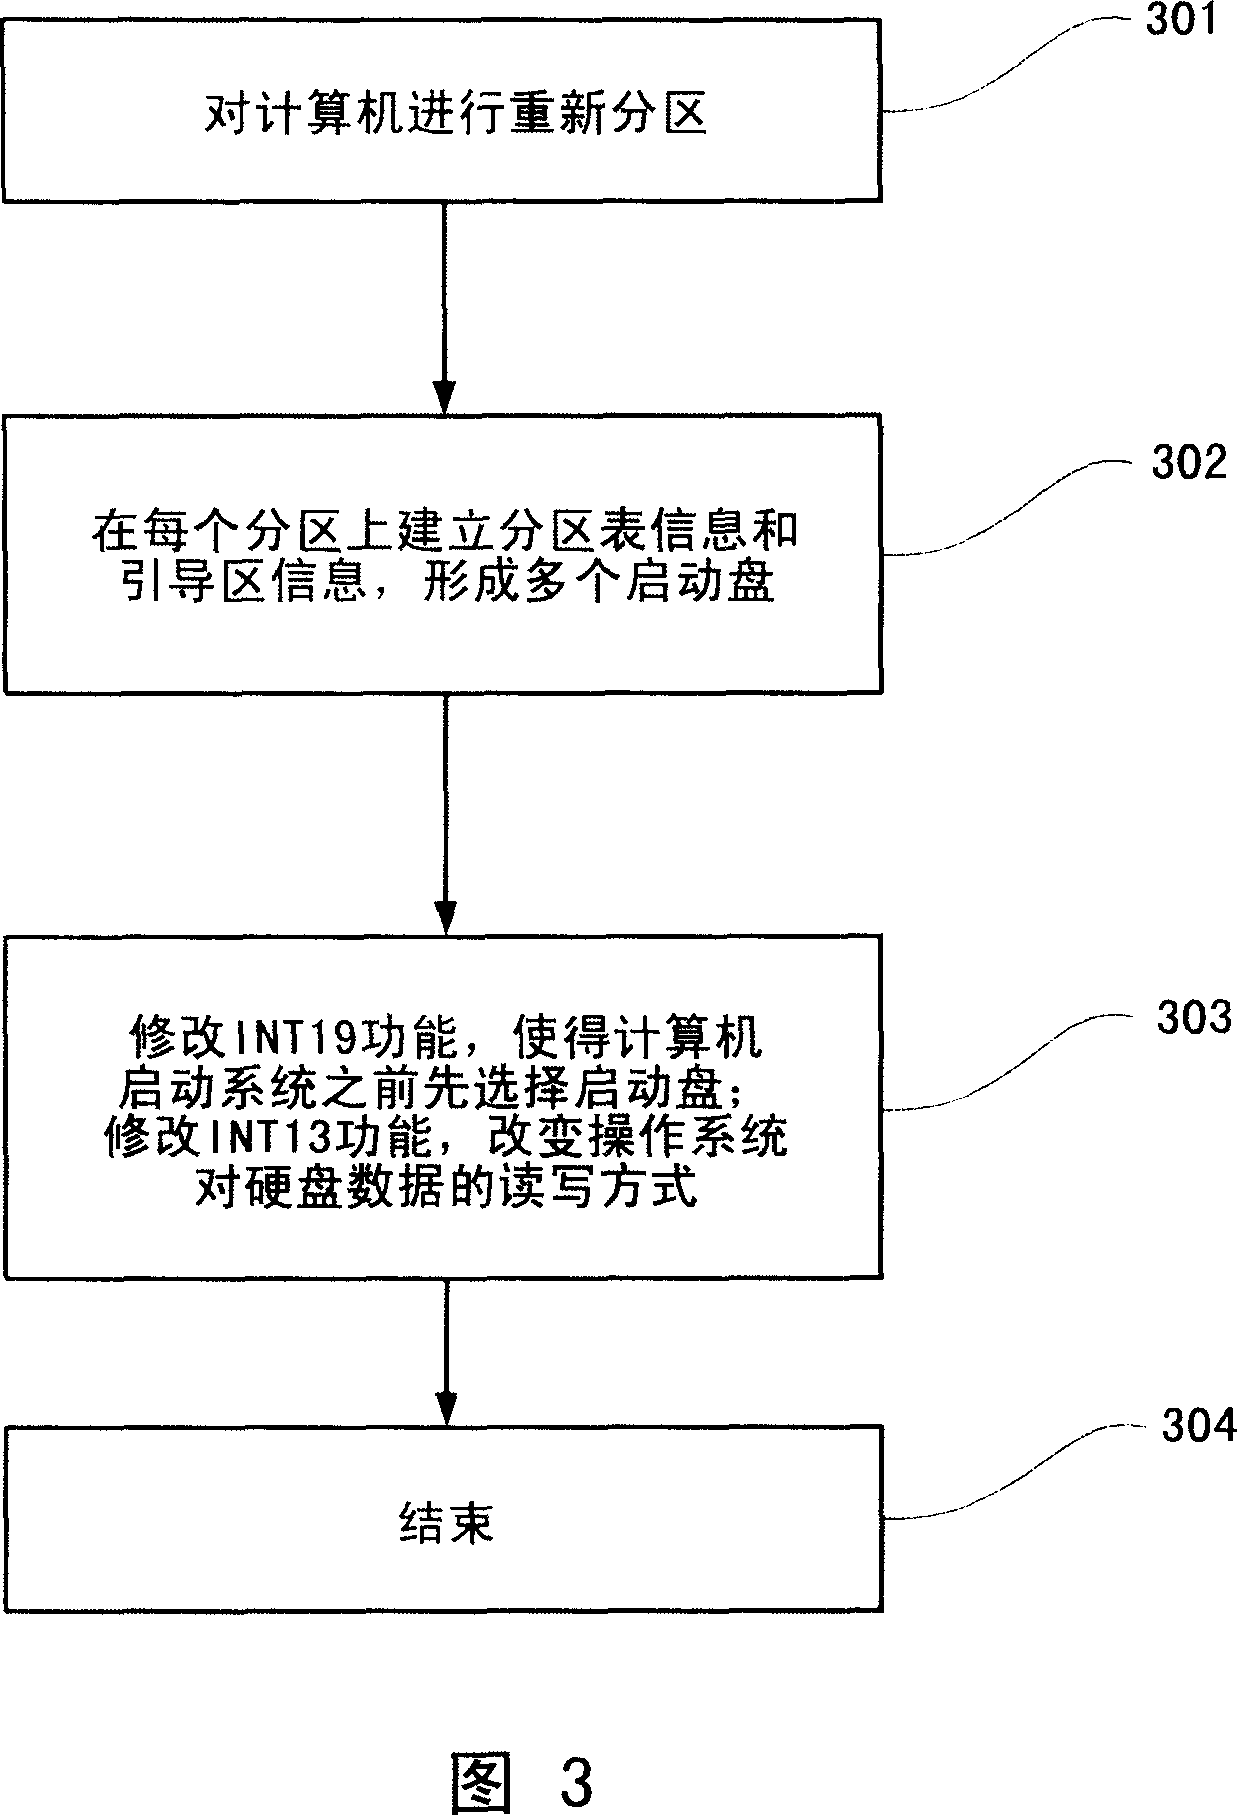 Method for realizing isolation among multiple users of using same computer